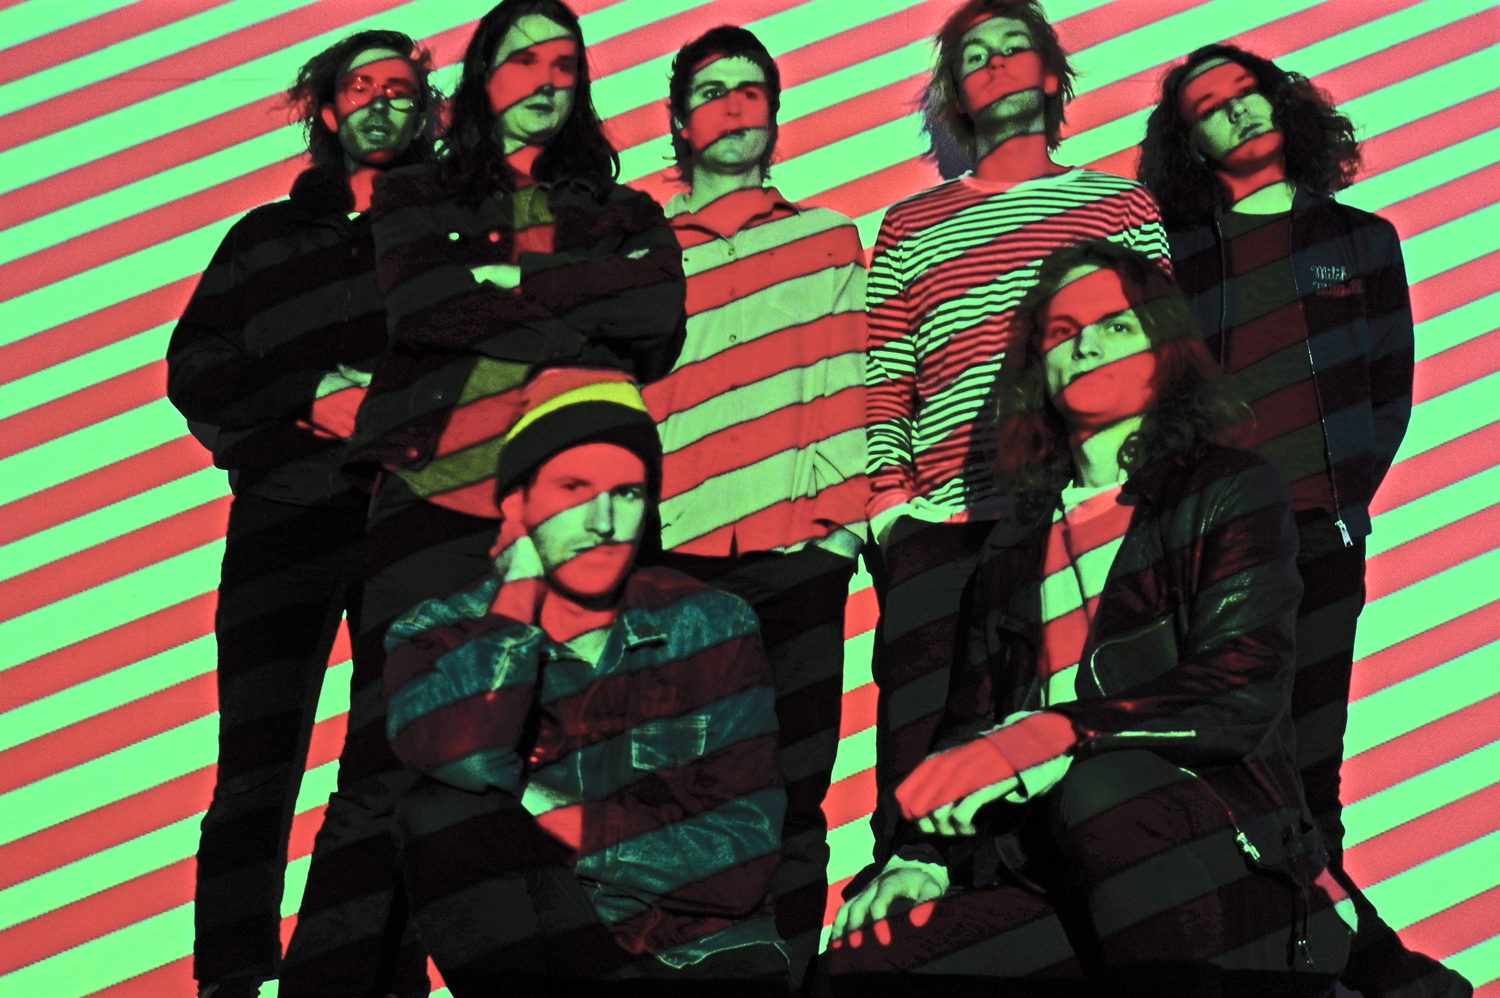 King Gizzard & The Lizard Wizard Are Giving Away Their New Album For Free And Want You To Make Physical Copies Of It